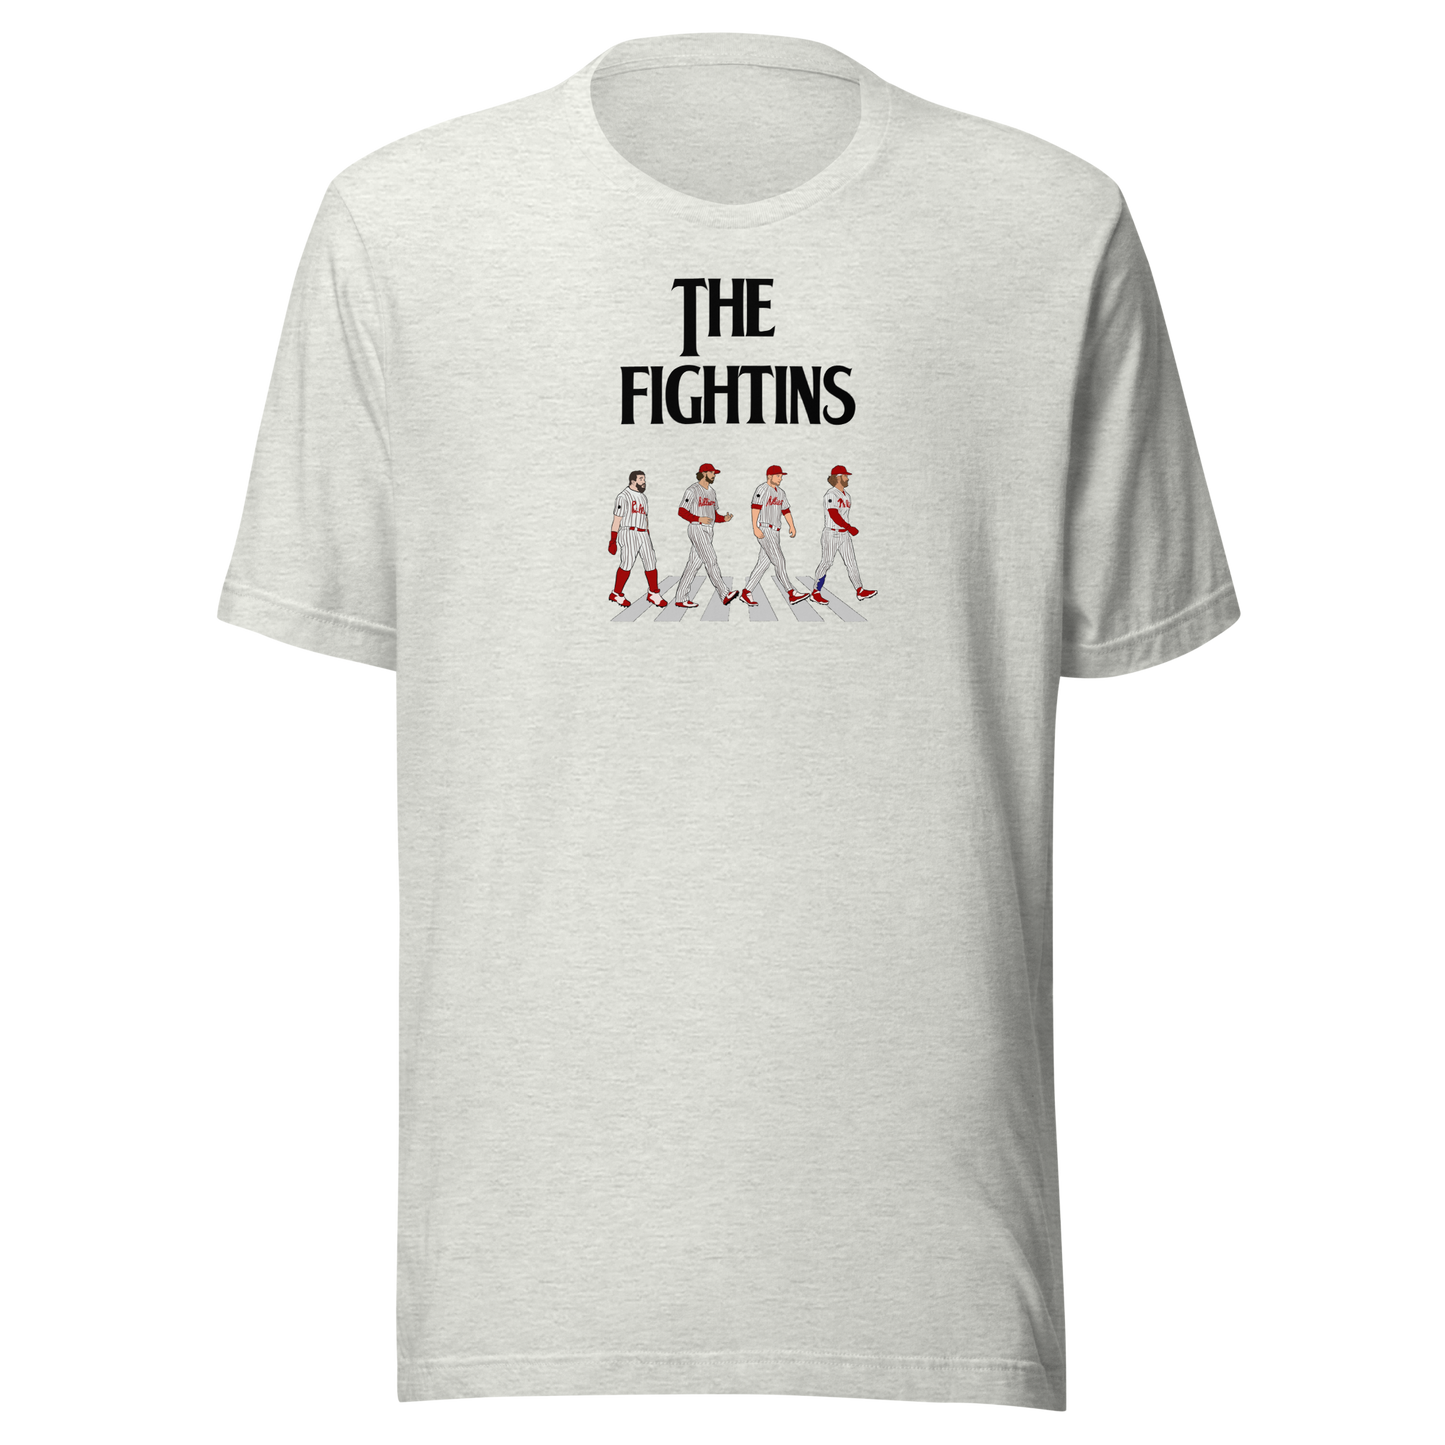 "The Fightins" Abbey Road T-Shirt